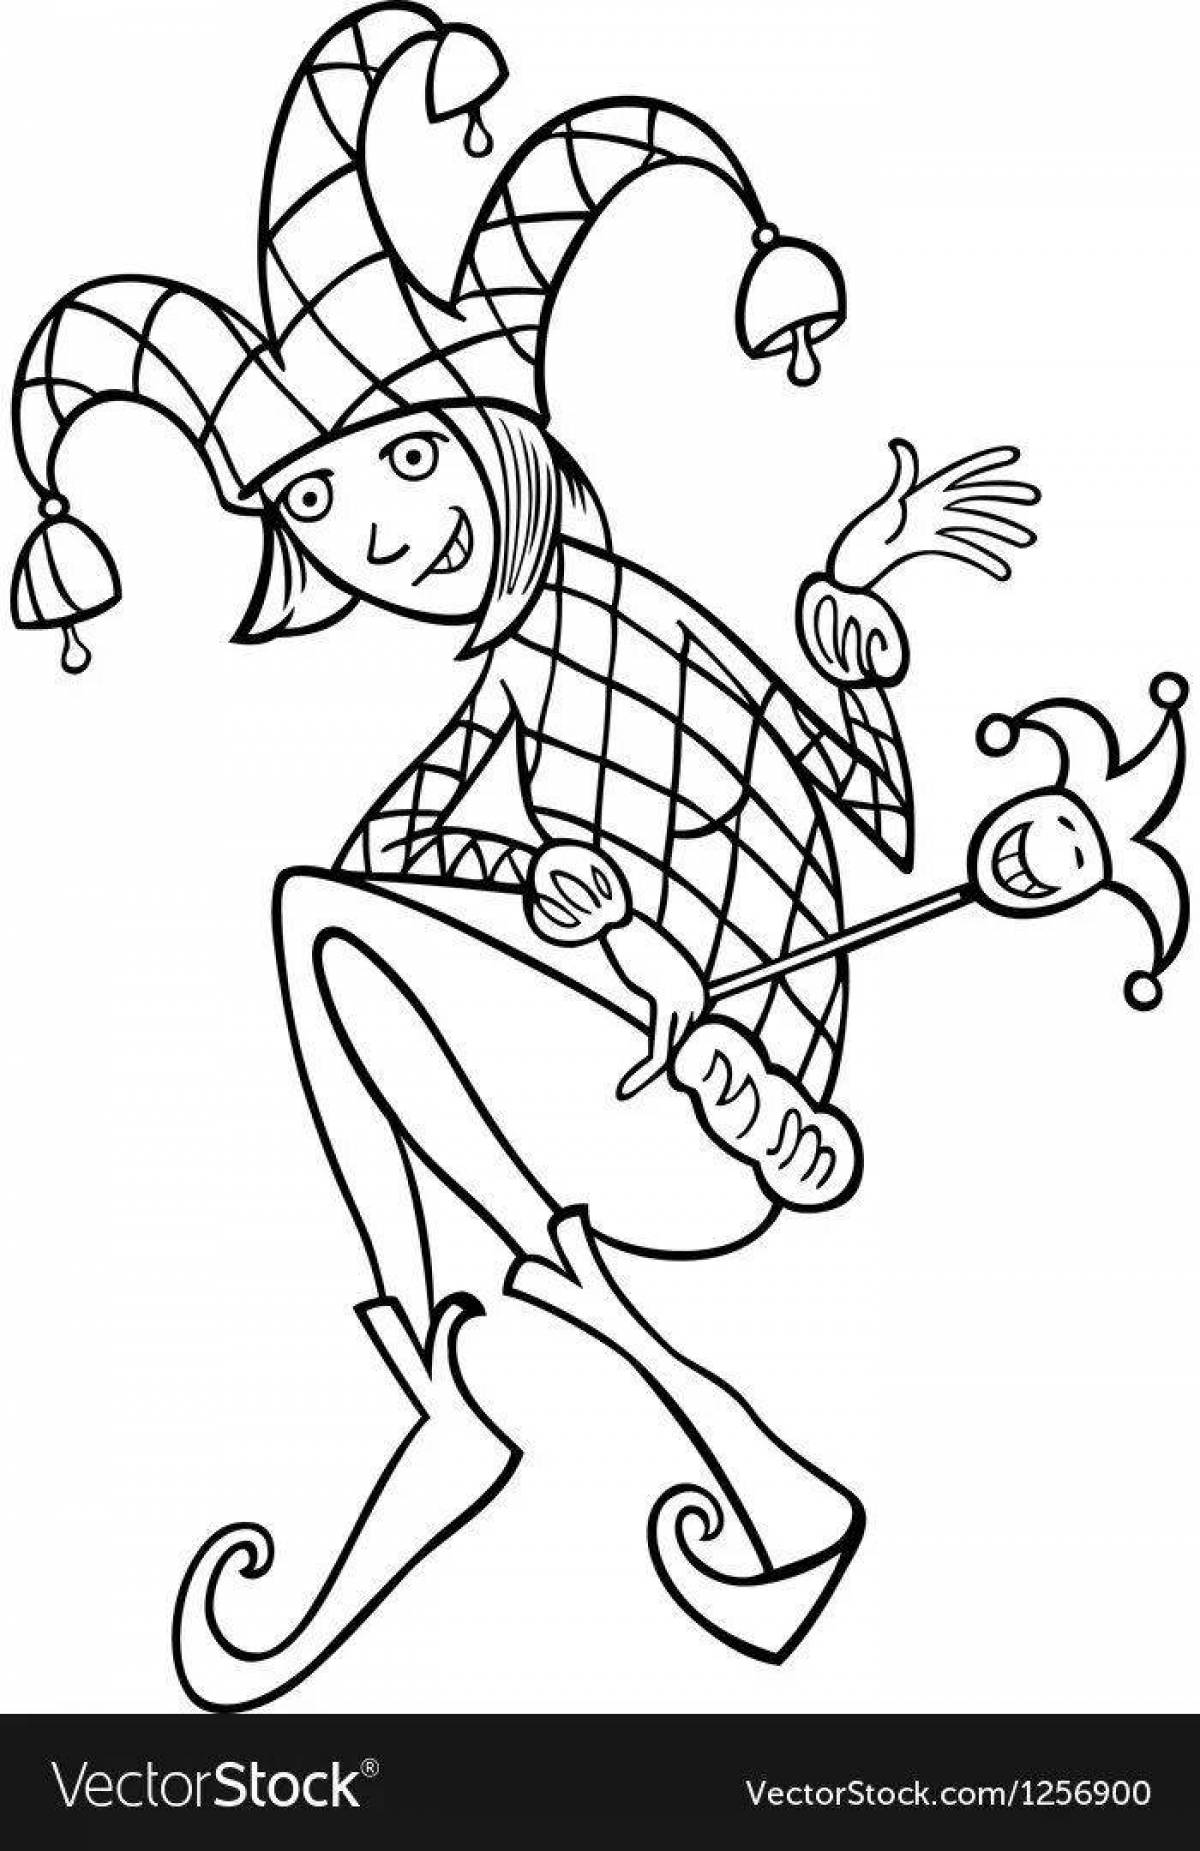 Coloring book gift jester